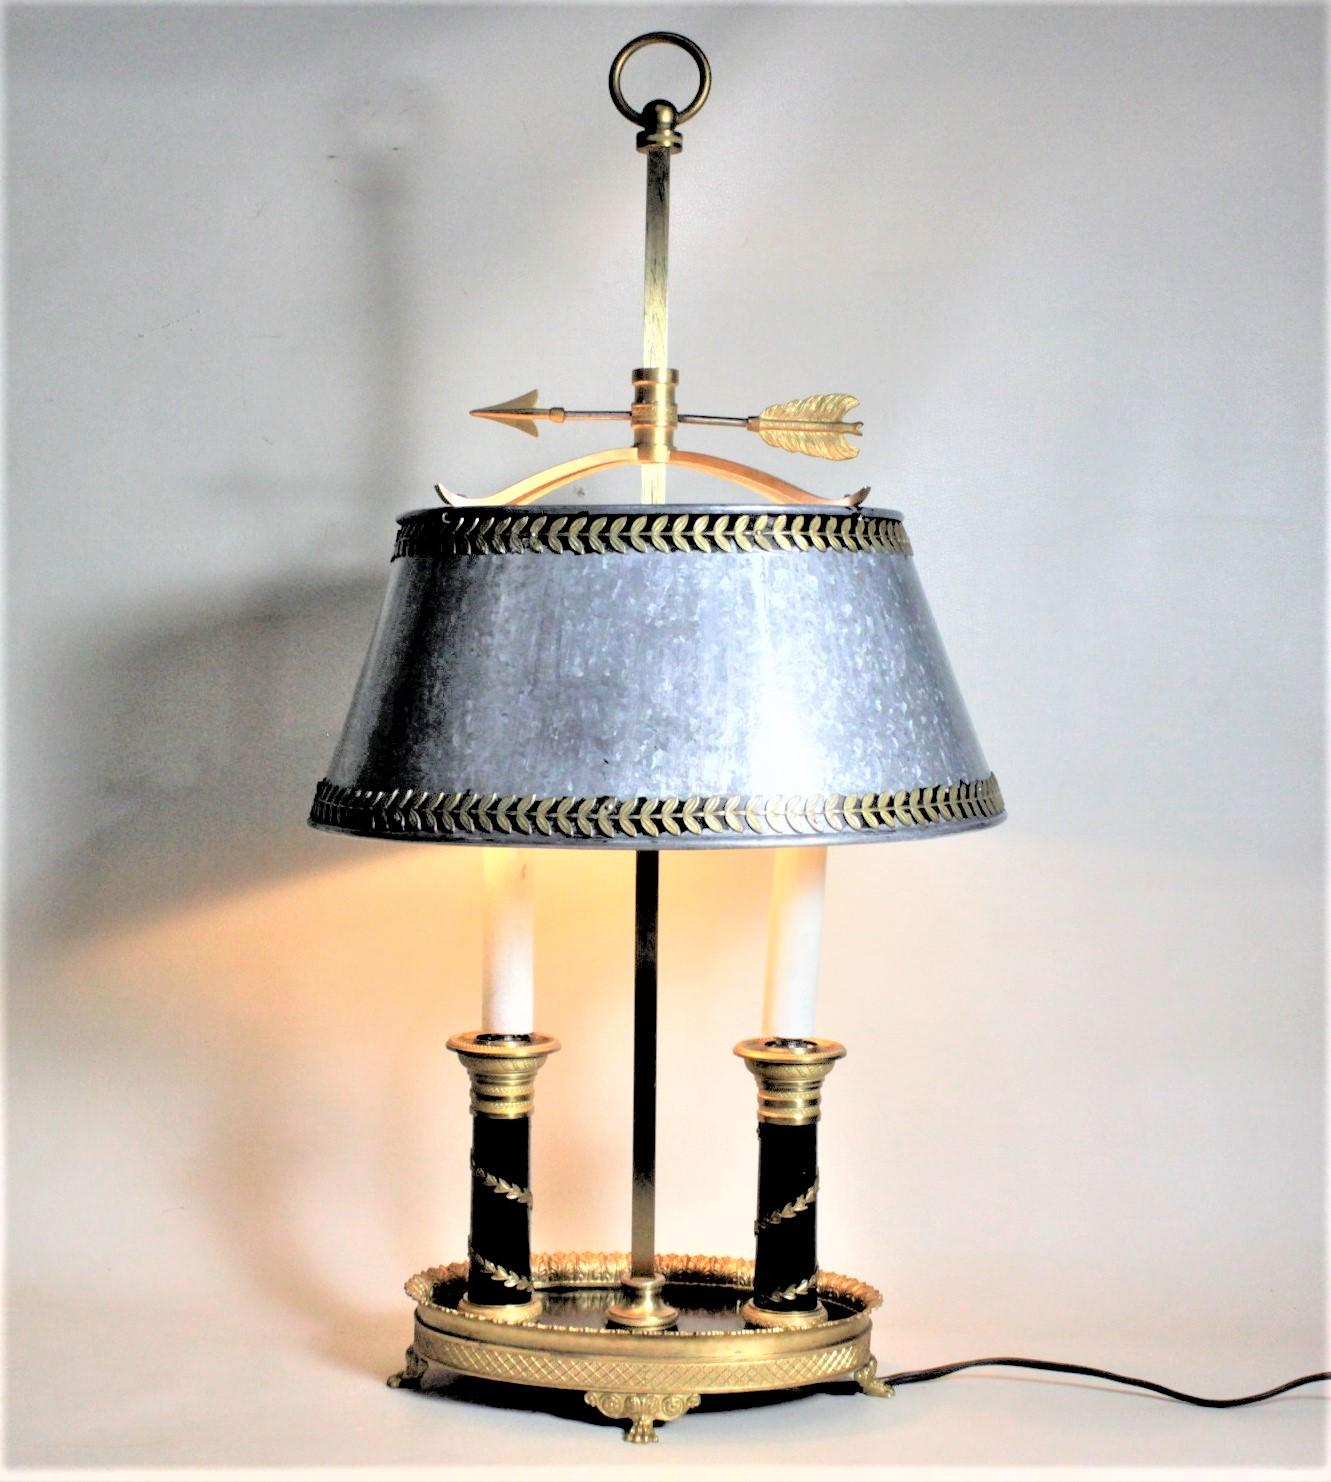 20th Century Antique Styled French Toleware Table or Desk Lamp with Solid Brass Frame